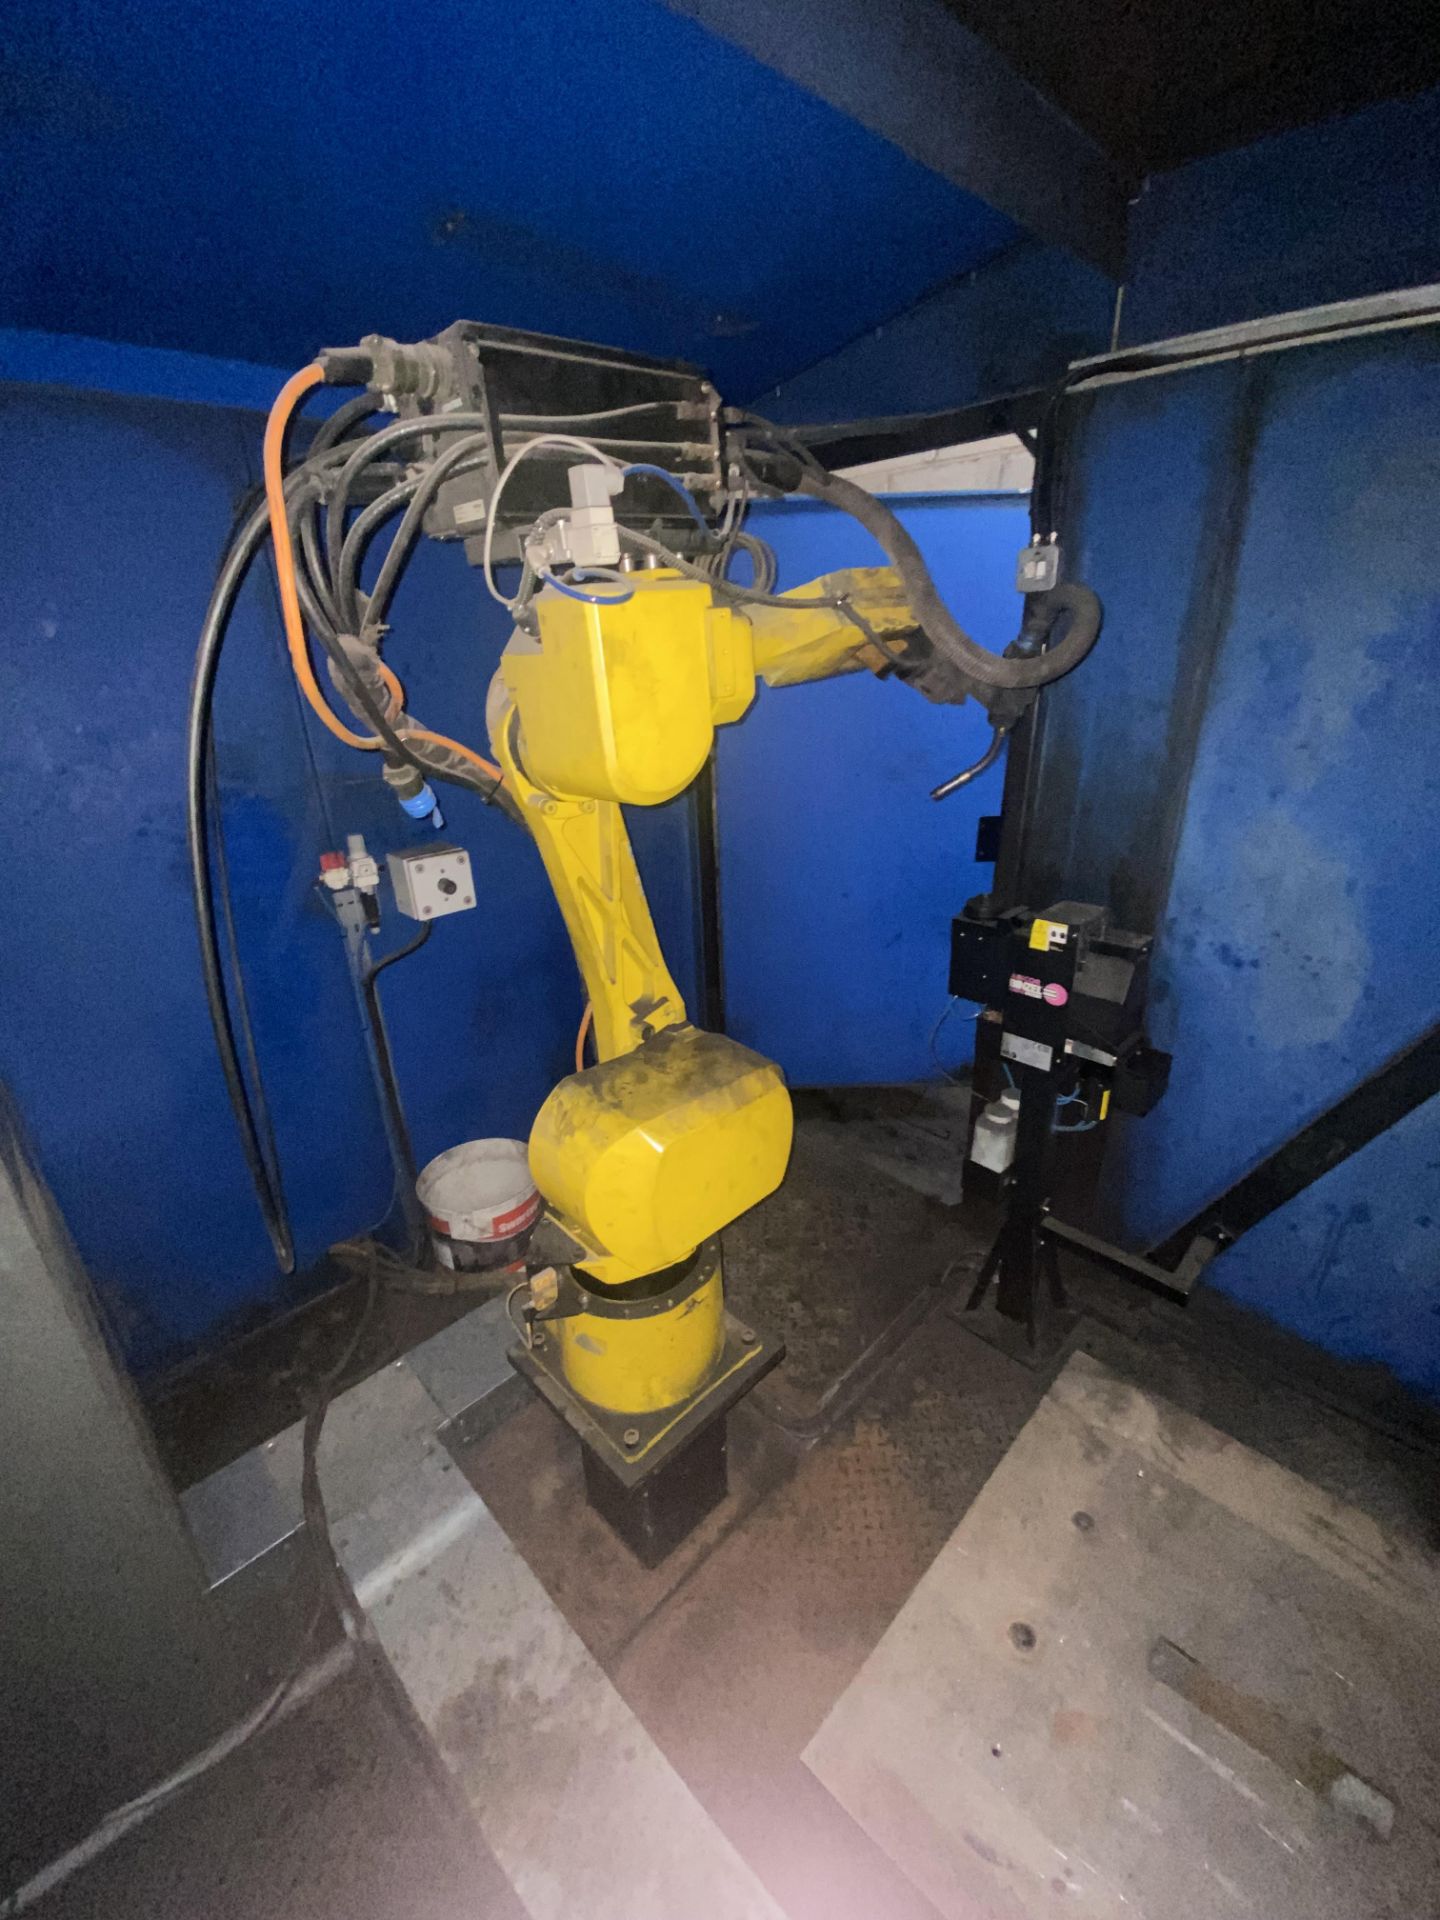 Comau ROBOT WELDING CELL, with Fanuc ROBOTARC Mate 100ib robot, Kemppi Promig 120R power source, - Image 11 of 11